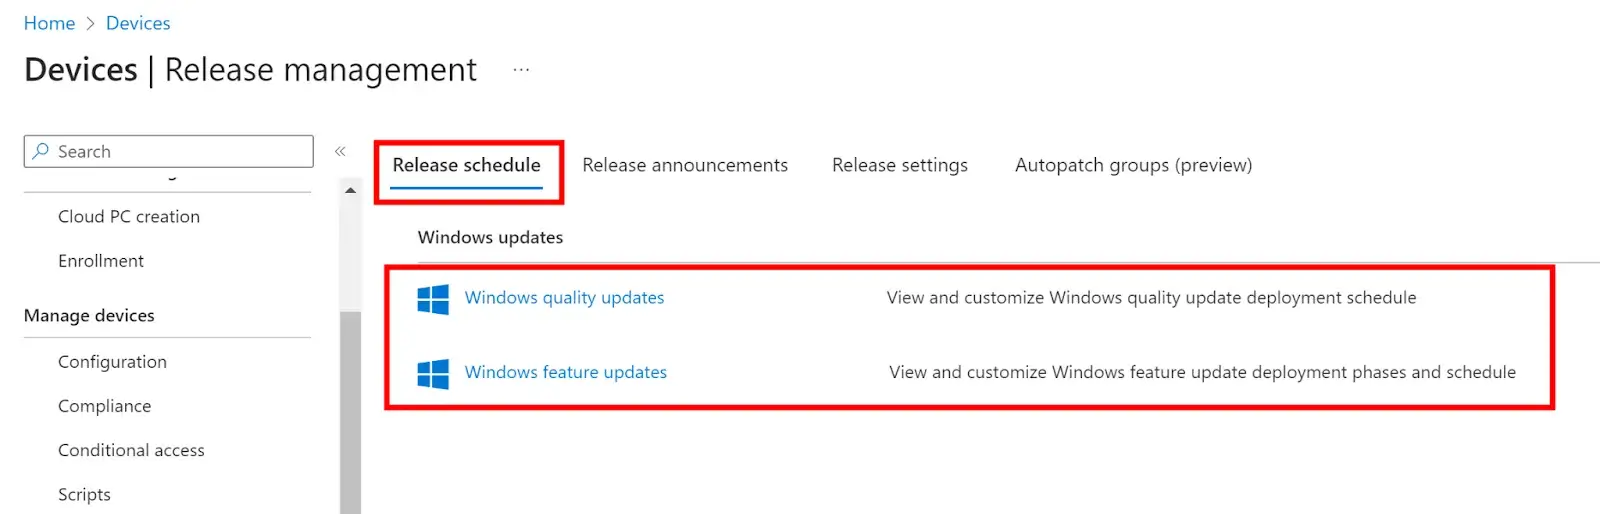 Release Schedule allows you to customize your deployment schedules for Windows Quality and Feature Updates. 